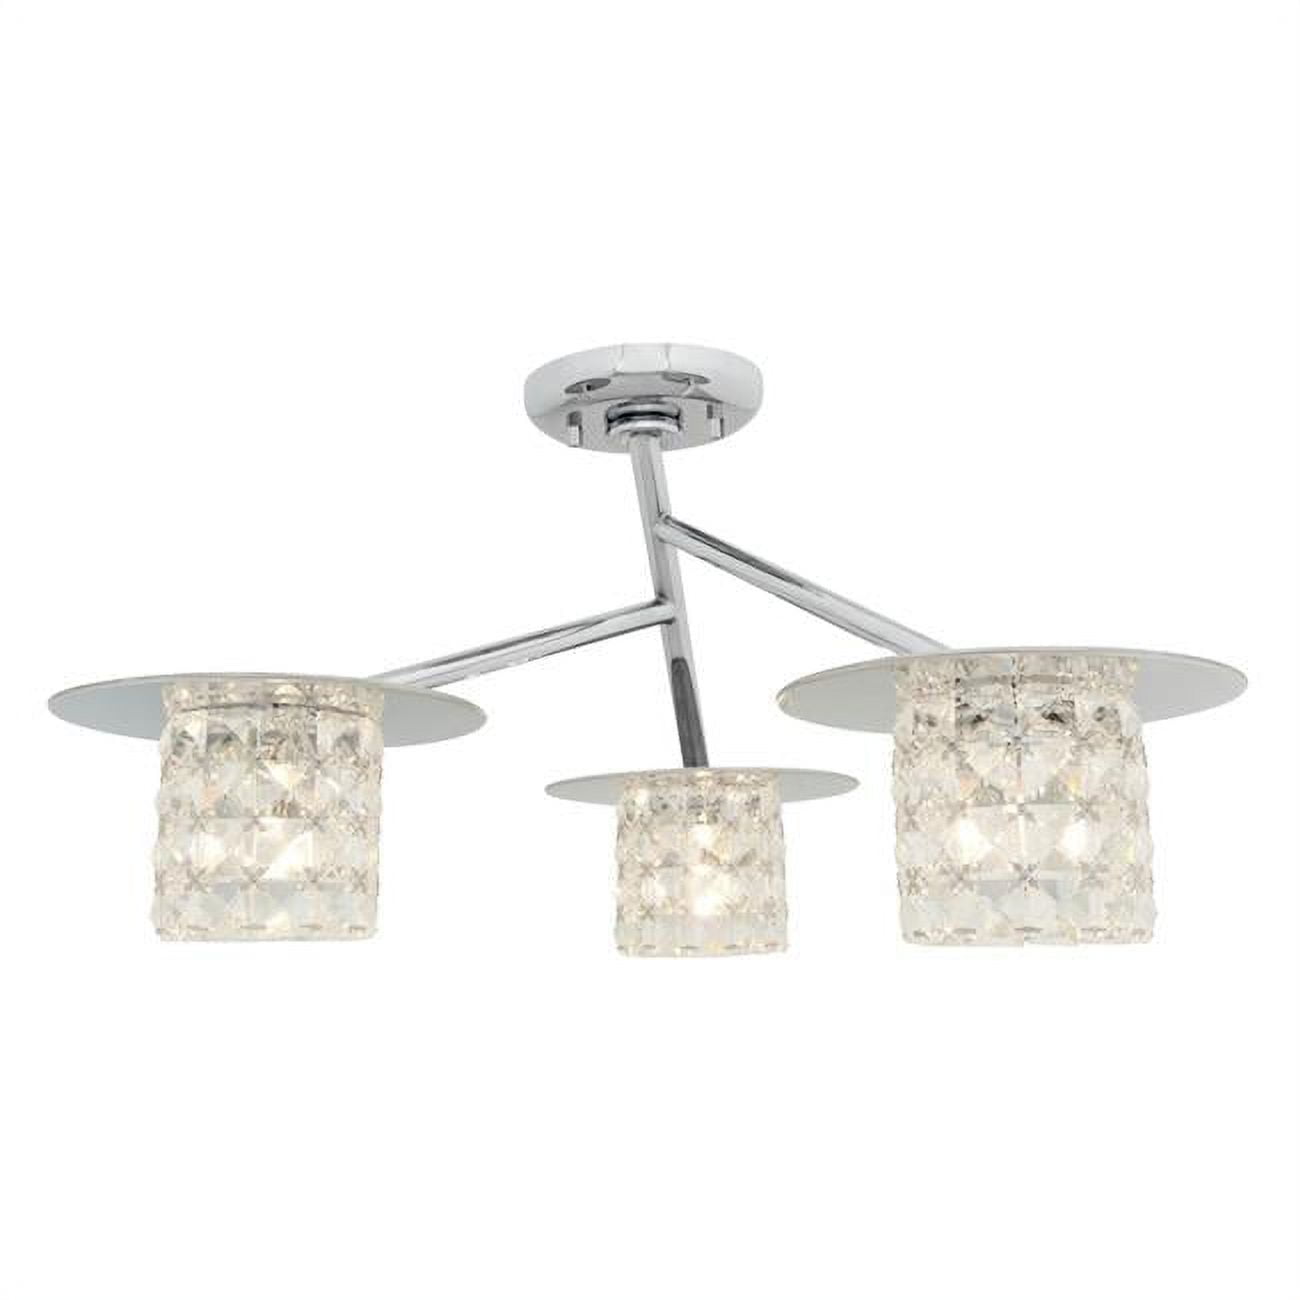 Picture of Access Lighting 23924-CH-CCL Prizm Three Light Semi Flush with Clear Crystal Glass Shade, Chrome Finish